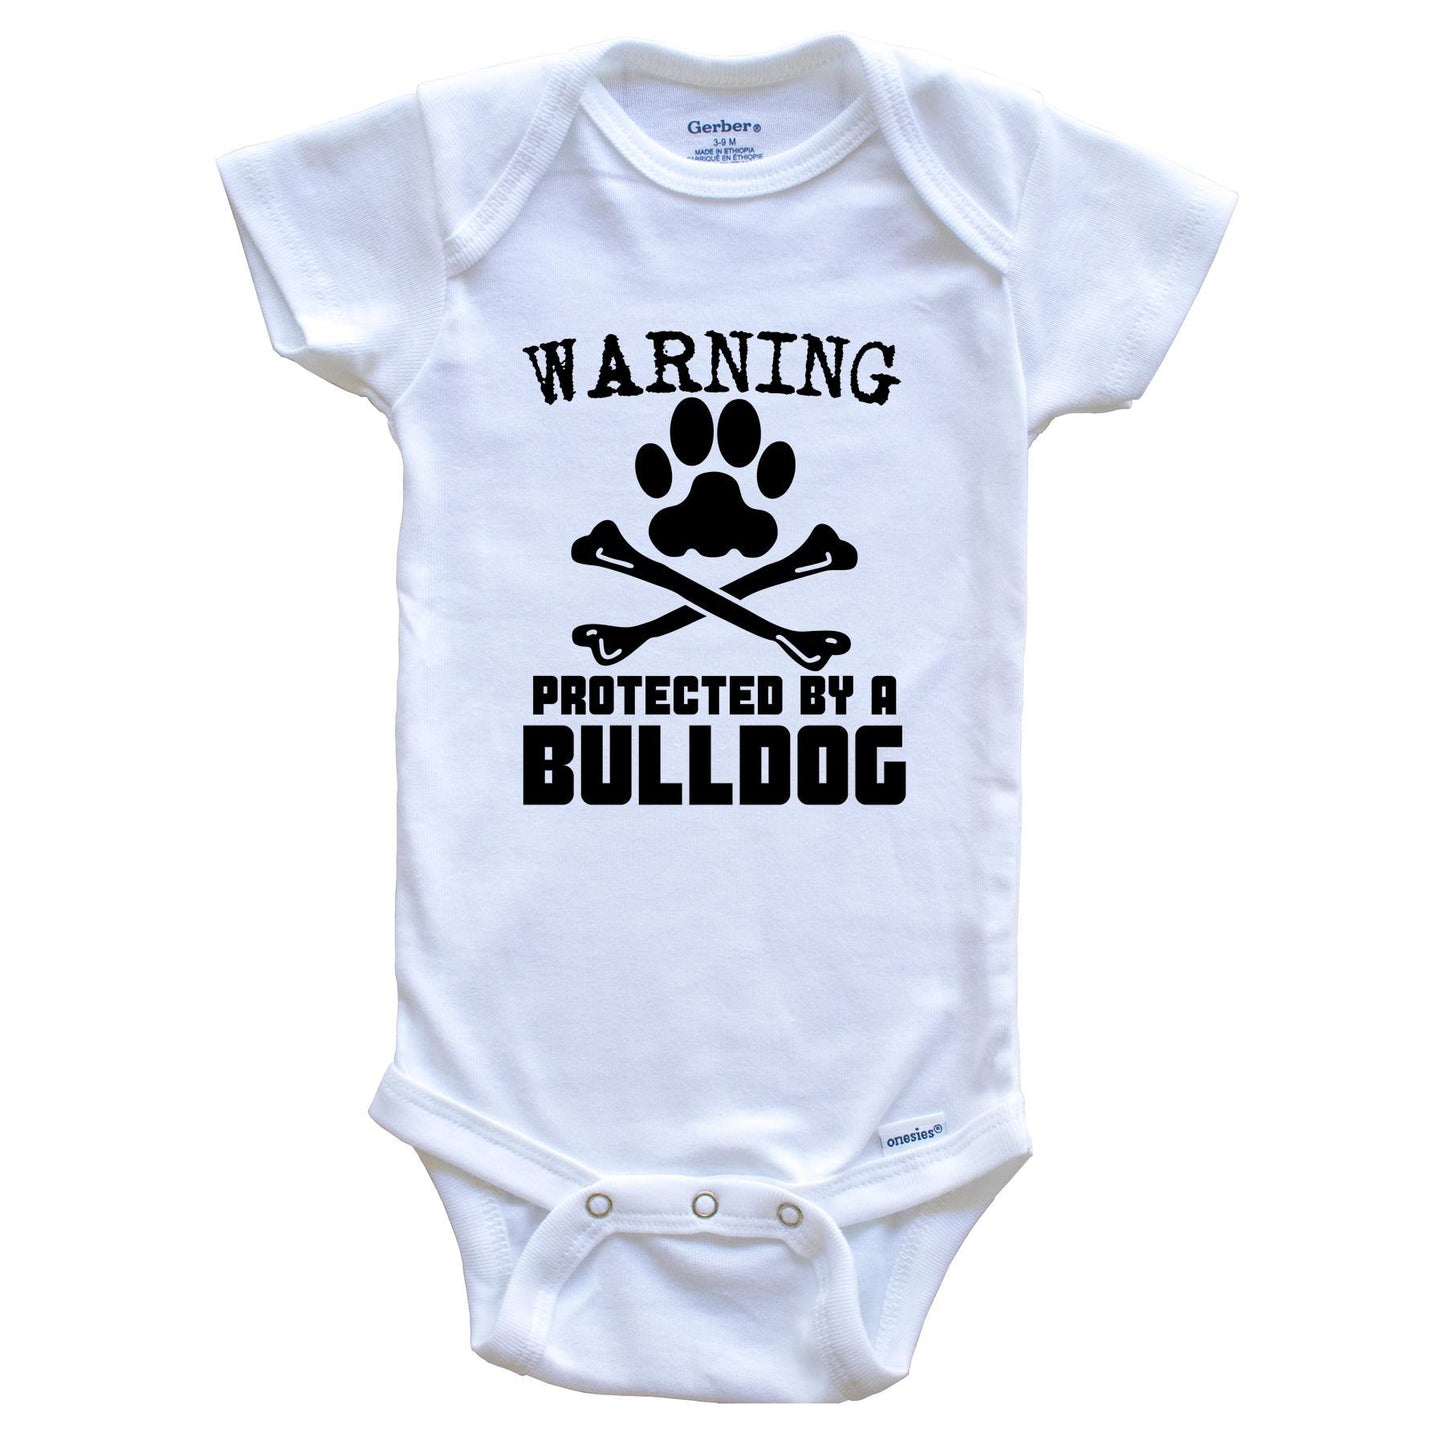 Warning Protected By A Bulldog Funny Baby Onesie